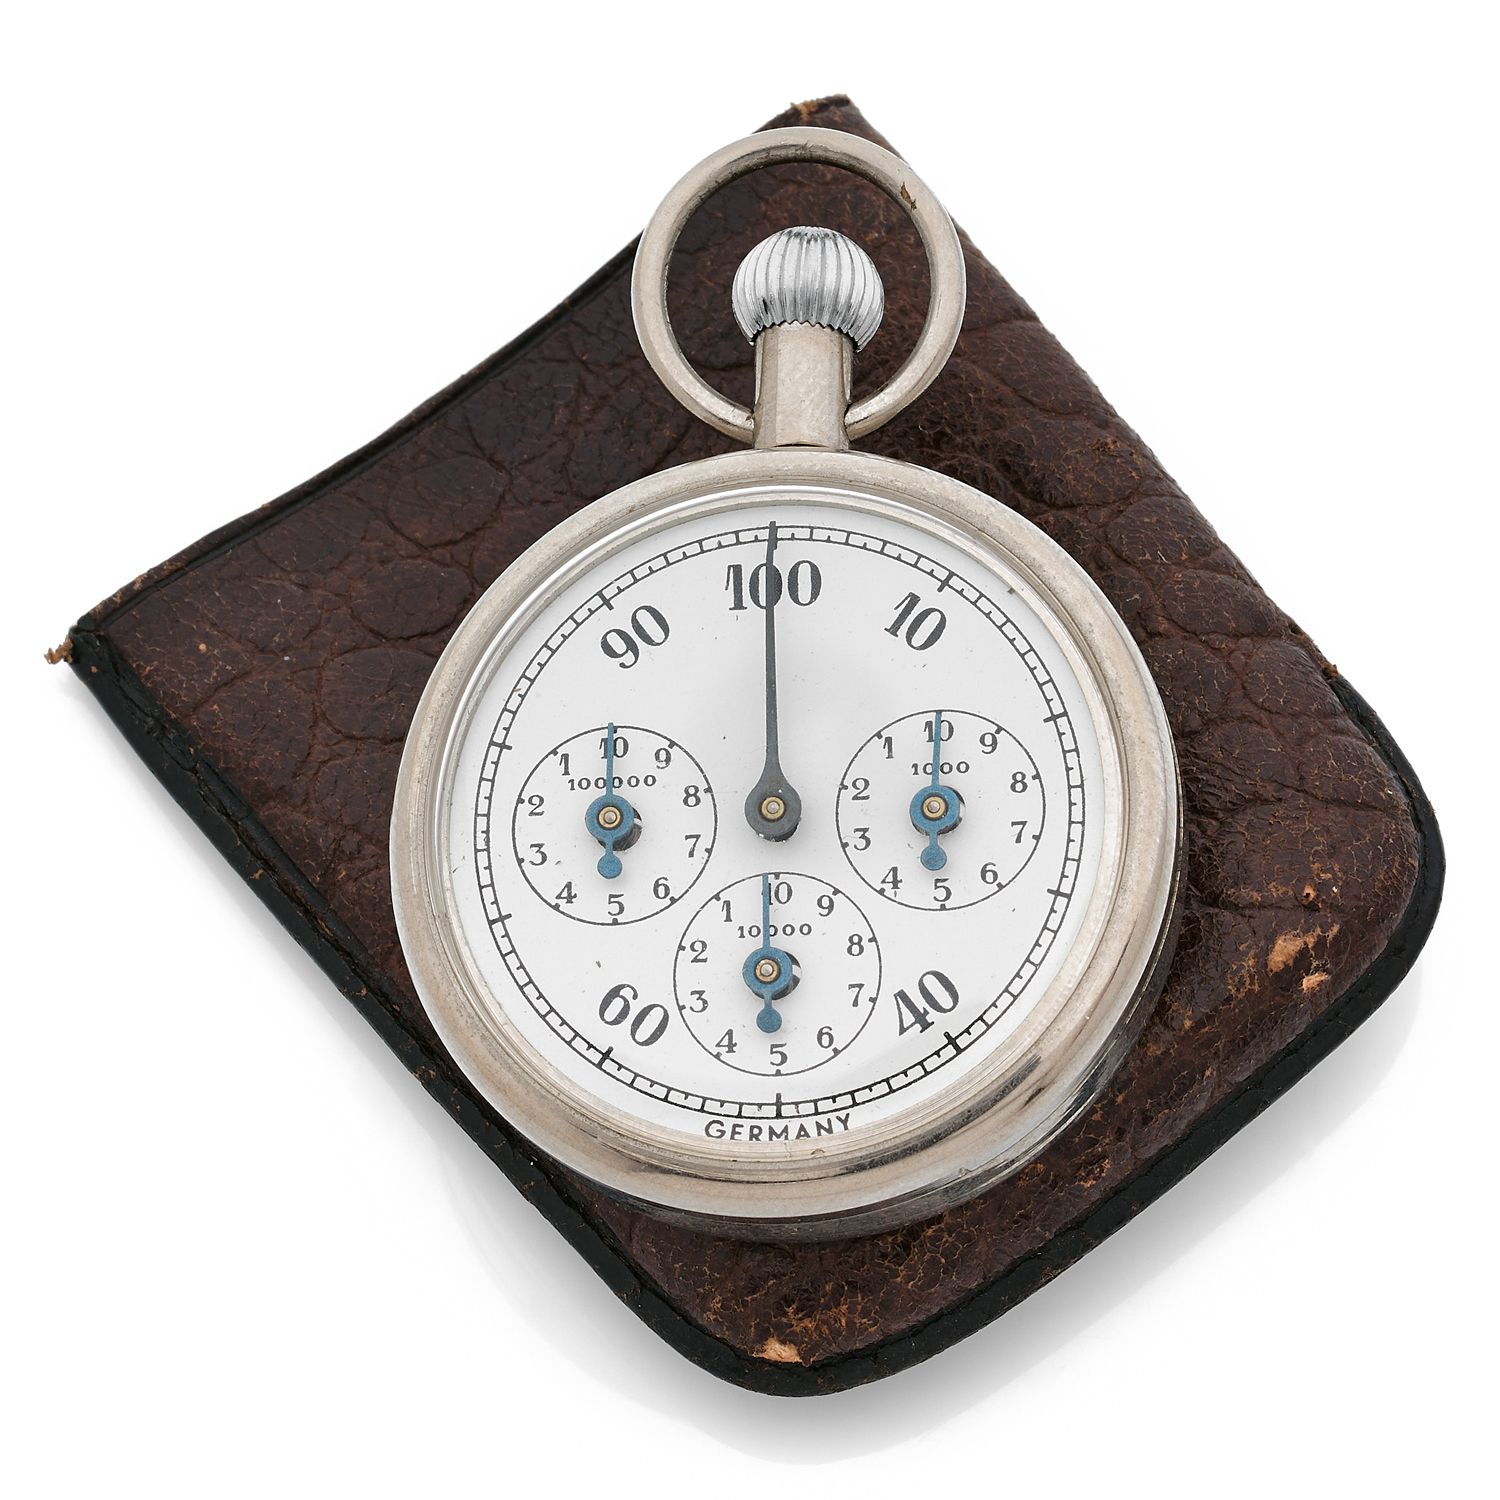 Null PODOMETER
Gusset
About 1930. 
Uncommon, steel pedometer of pocket to measur&hellip;